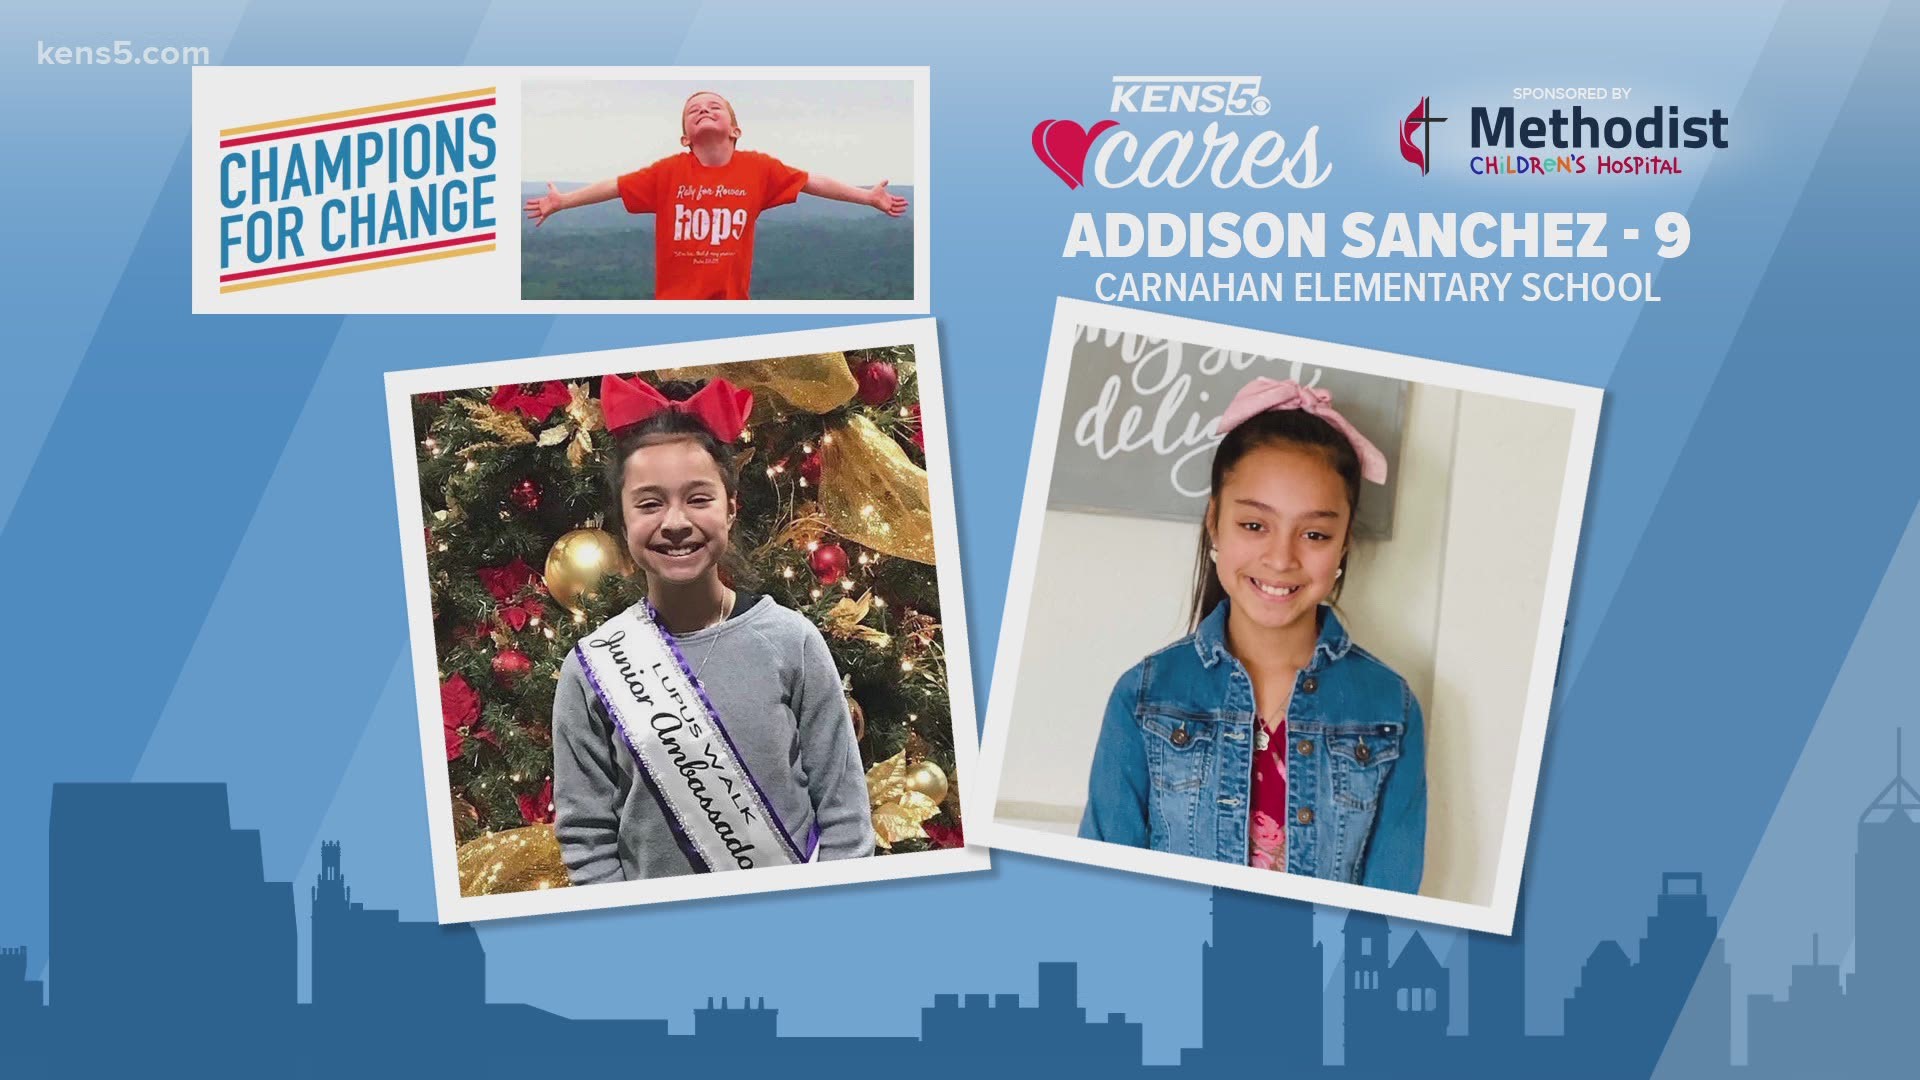 Addison Sanchez is a Champion for Change! She created a program to provide free raincoats, umbrellas for those in need.